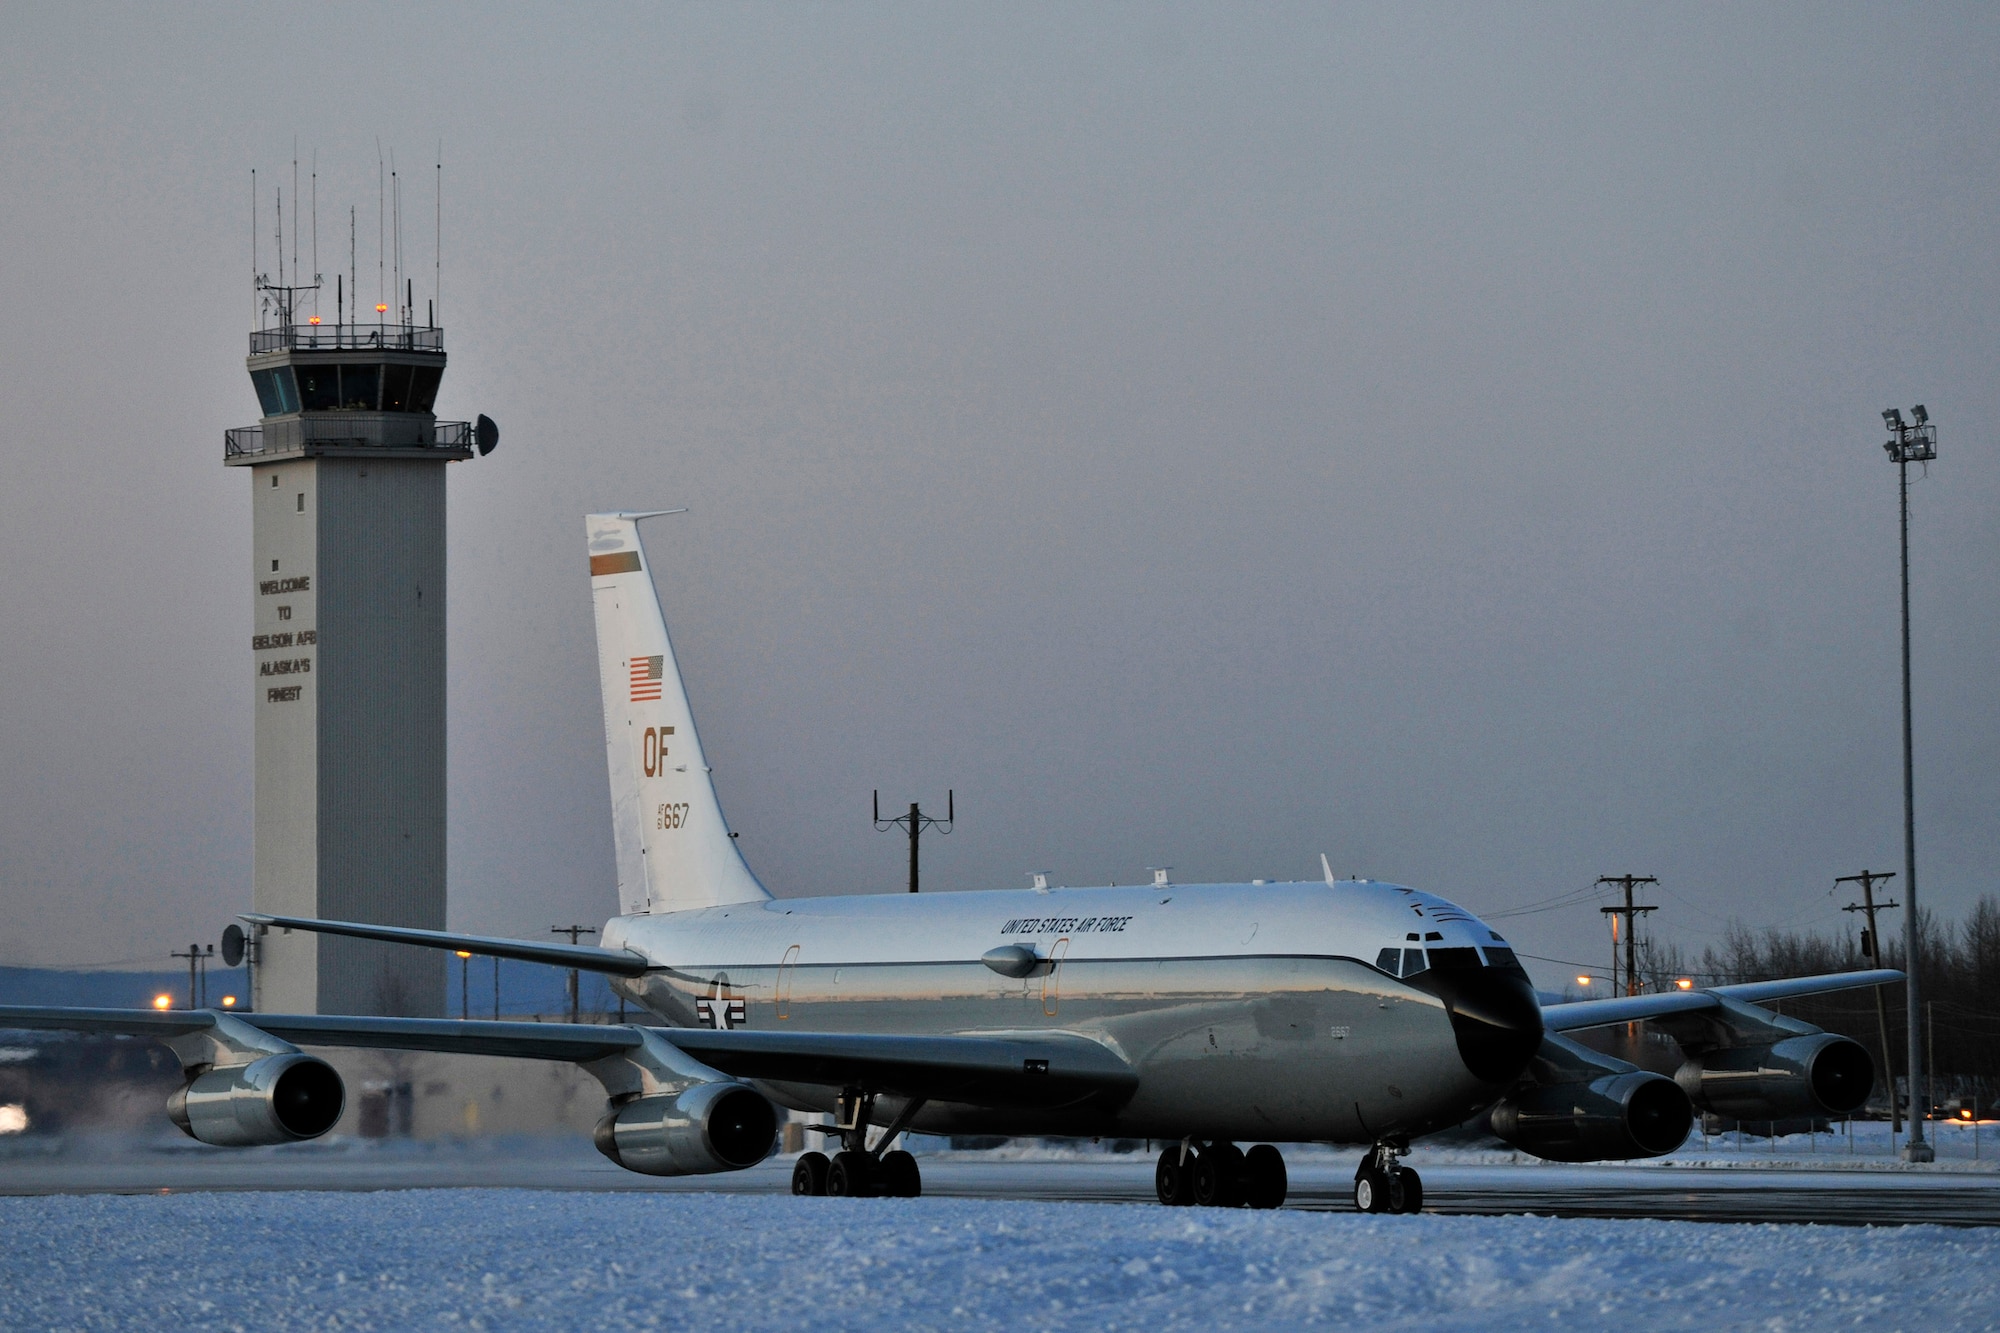 EIELSON AIR FORCE BASE, Alaska -- A WC-135 Constant Phoenix from the 45th Reconnaissance Squadron taxis in on the flightline here after a mission supporting Operation Tomodachi. The WC-135 is an atmospheric collection aircraft that was tasked with collecting air samples in international airspace over the Pacific as part of the disaster relief effort in response to Japan?s March 11 earthquake and tsunami. The Constant Phoenix team was in Alaska for nearly six weeks. (Air Force photo by Staff Sgt. Christopher Boitz)